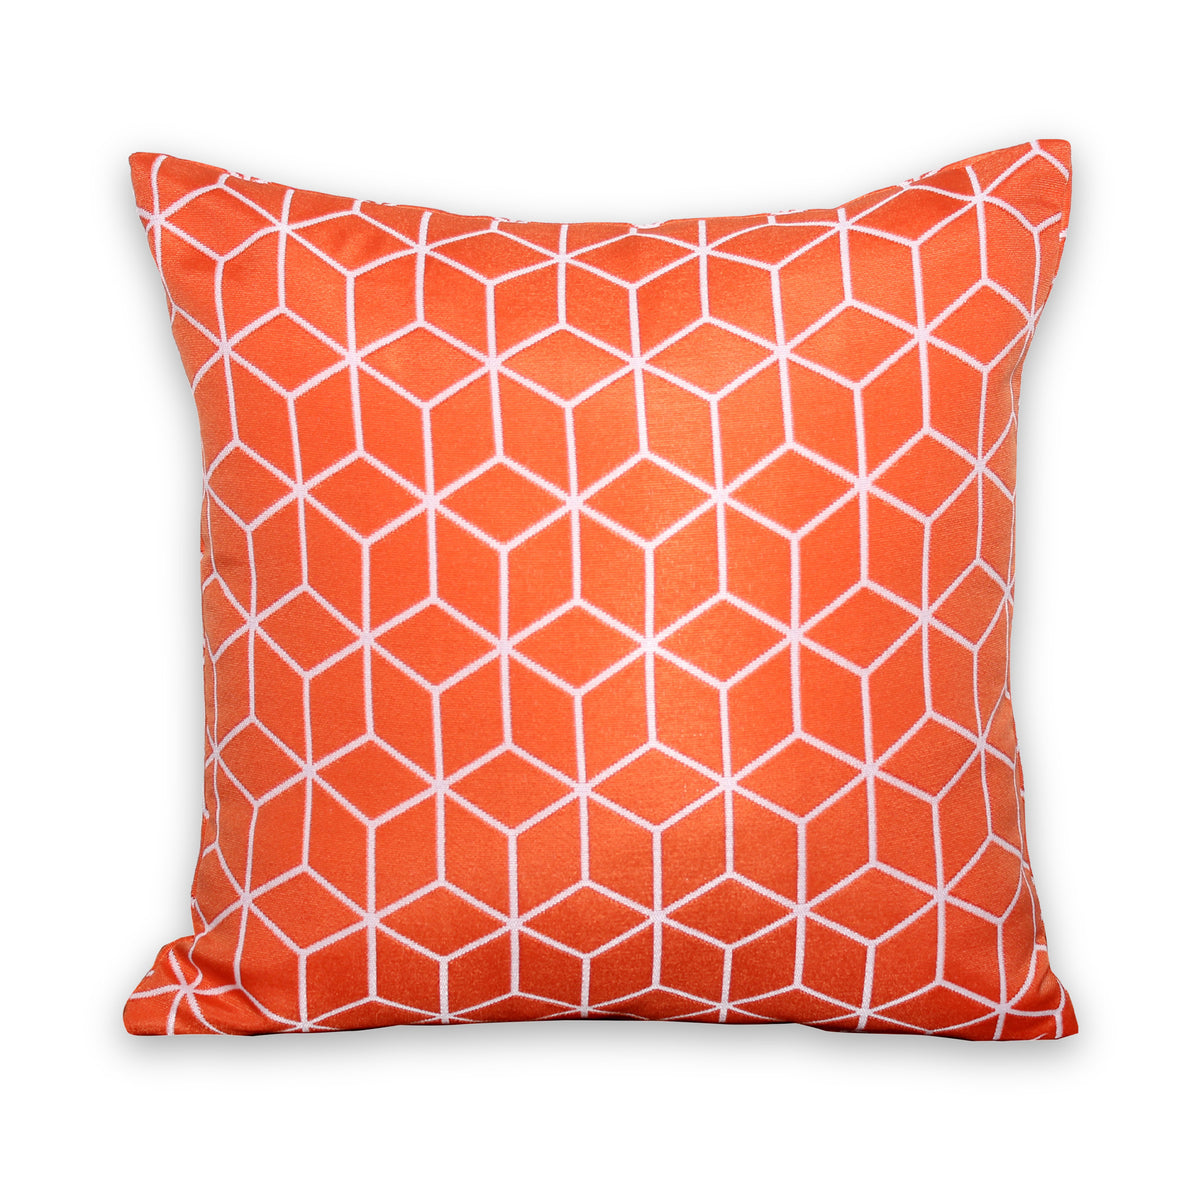 Outdoor Orange Geometric Scatter Cushion from Roseland